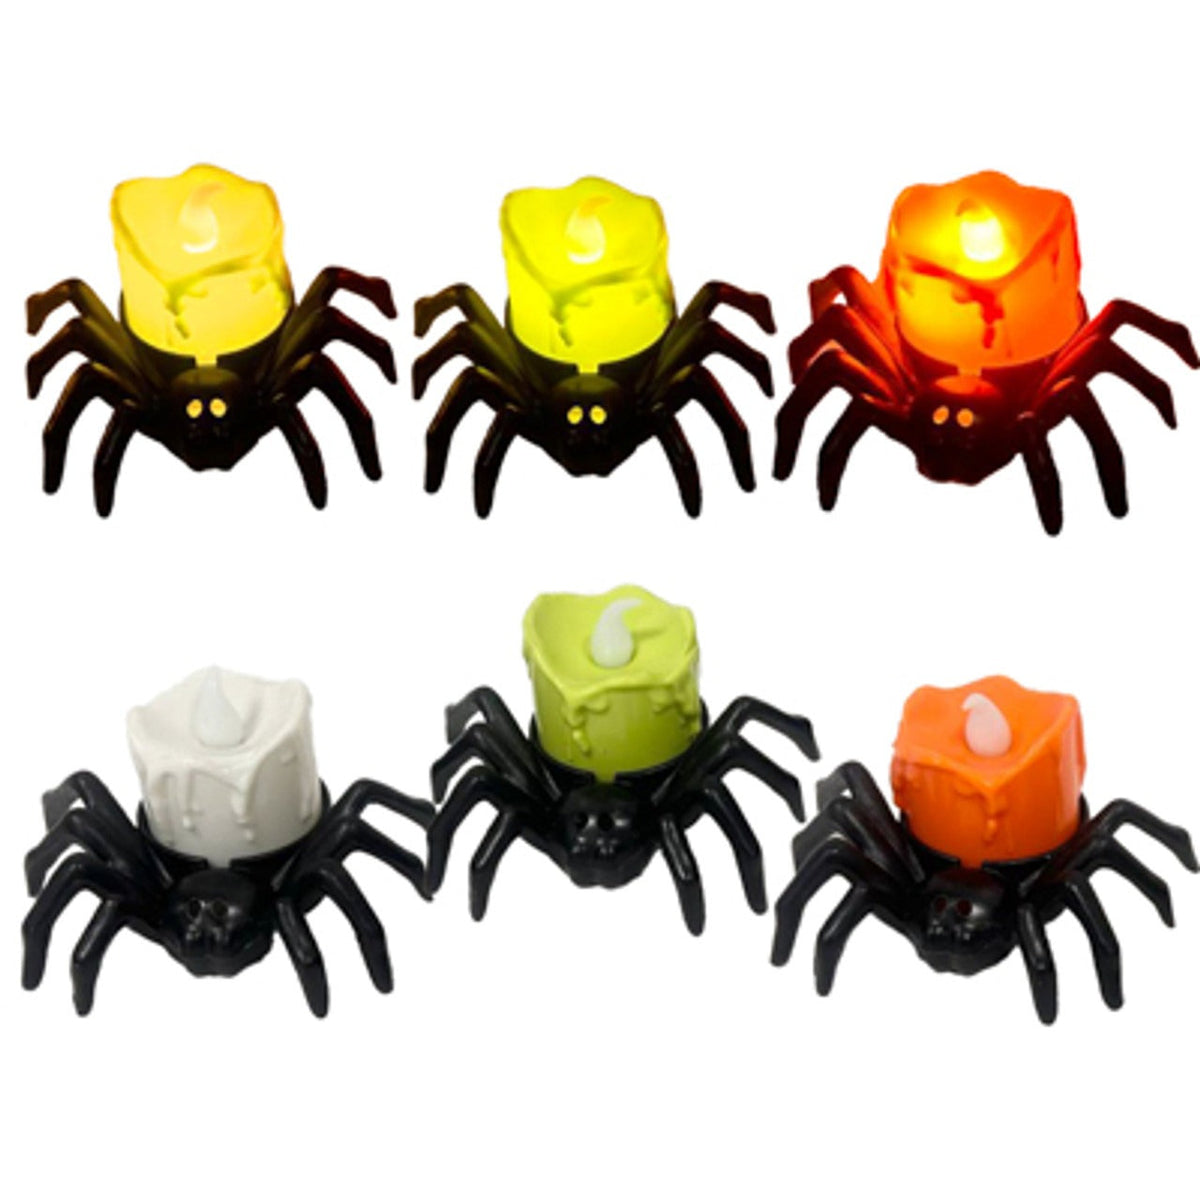 REGEN PRODUCTS CORP. Halloween Candle With Spider, Assortment, 1 Count